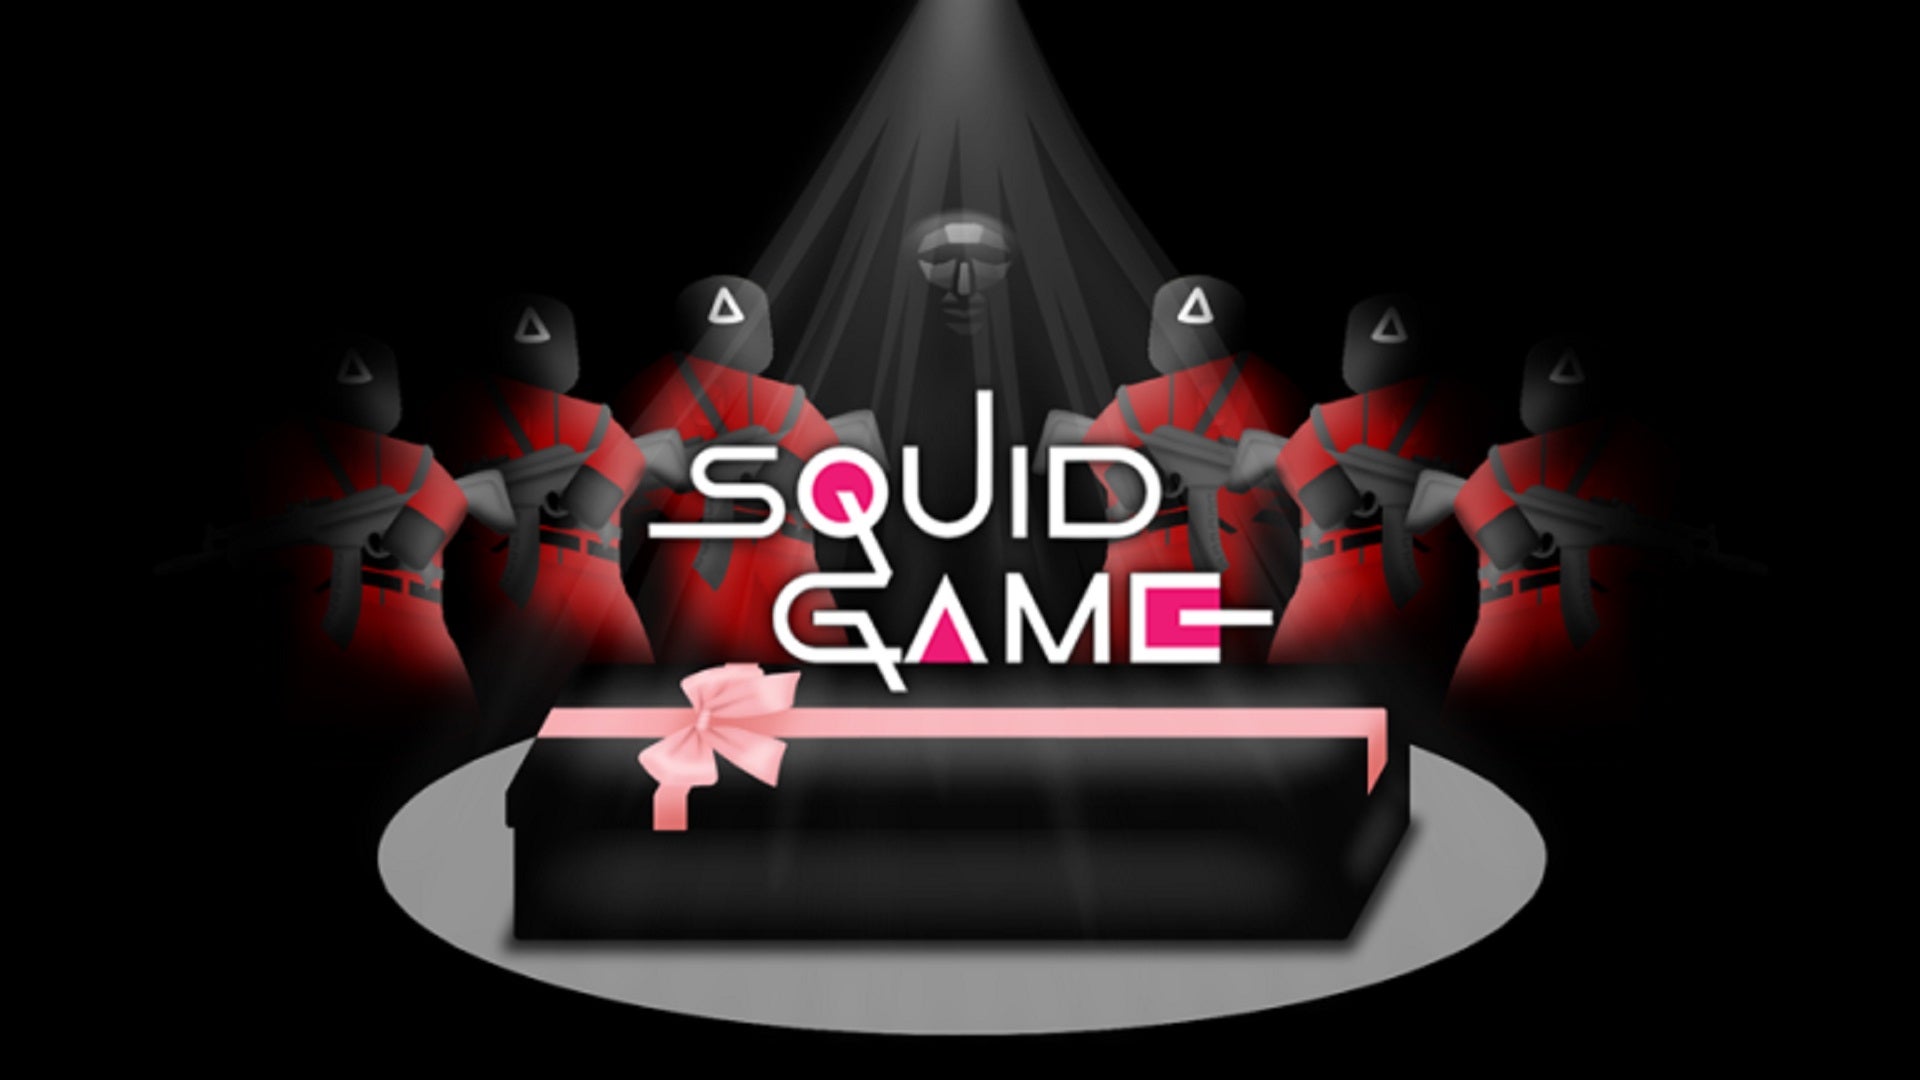 Six Roblox characters dressed as Squid Game guards flank a character dressed as the gamemaster. In the foreground is a coffin wrapped up like a gift box.